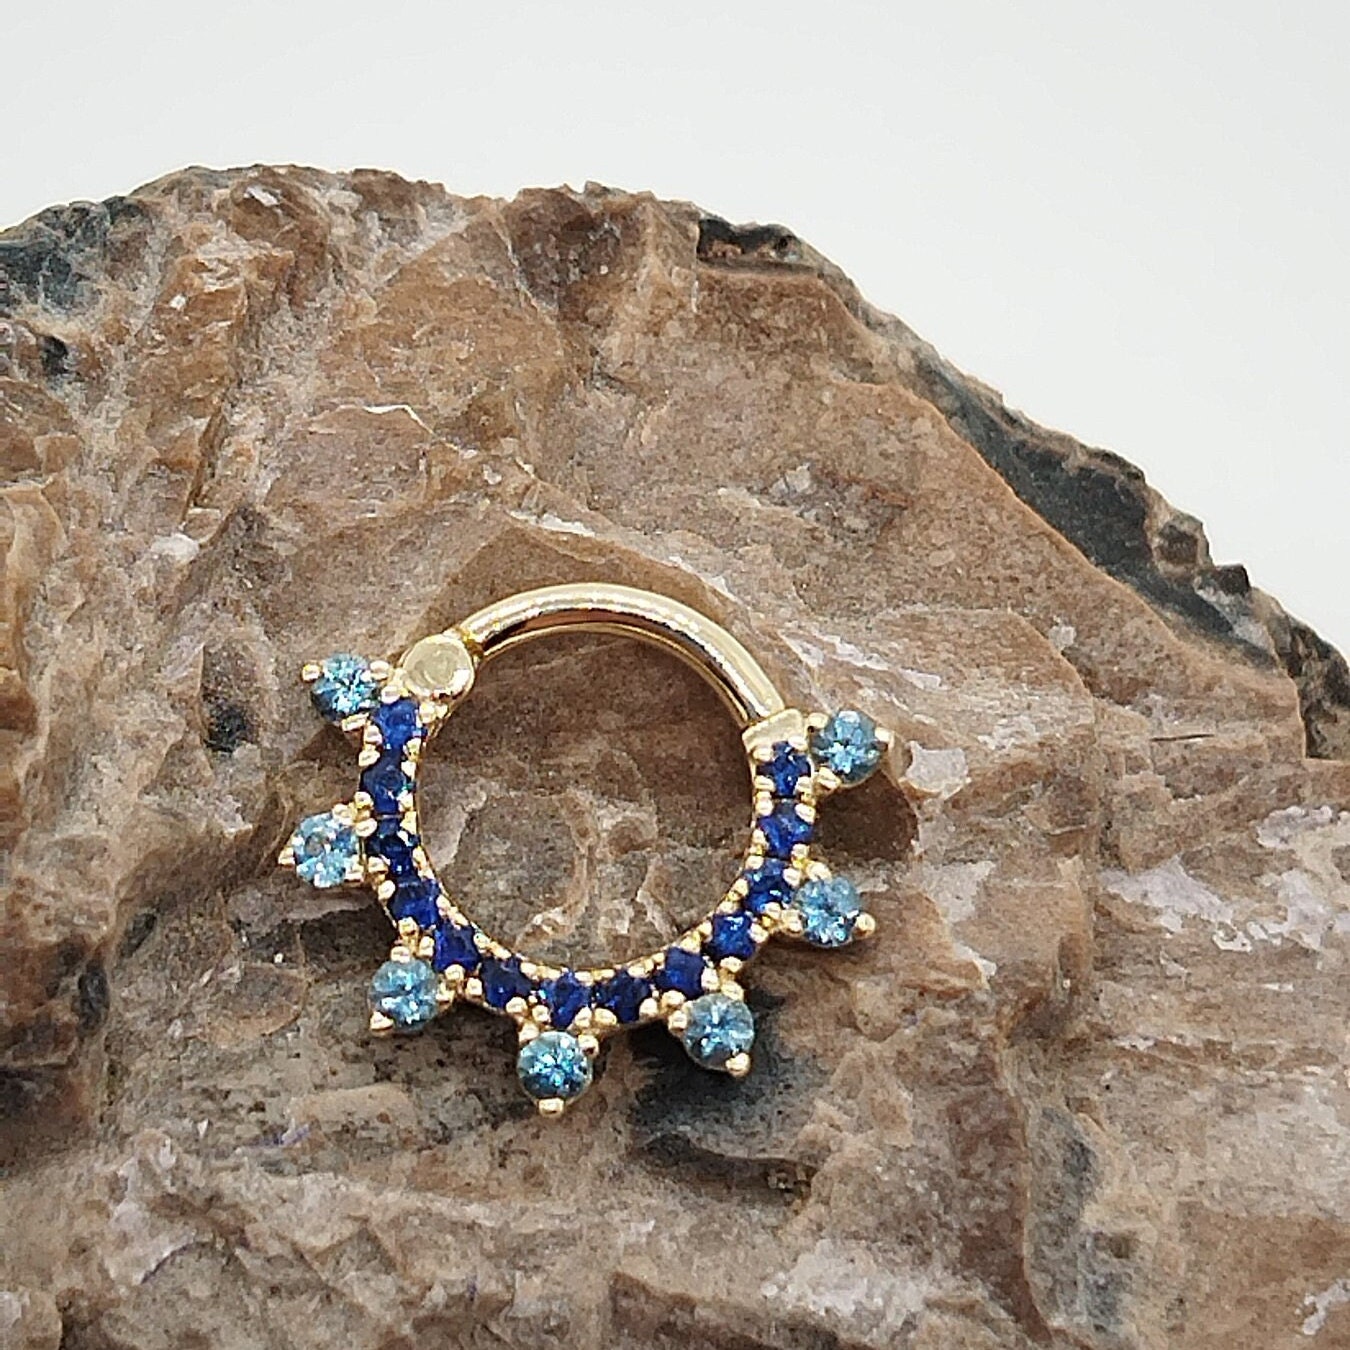 Cartilage Earring 14k Gold Sapphire Aquamarine Nose Ring Daith pic image